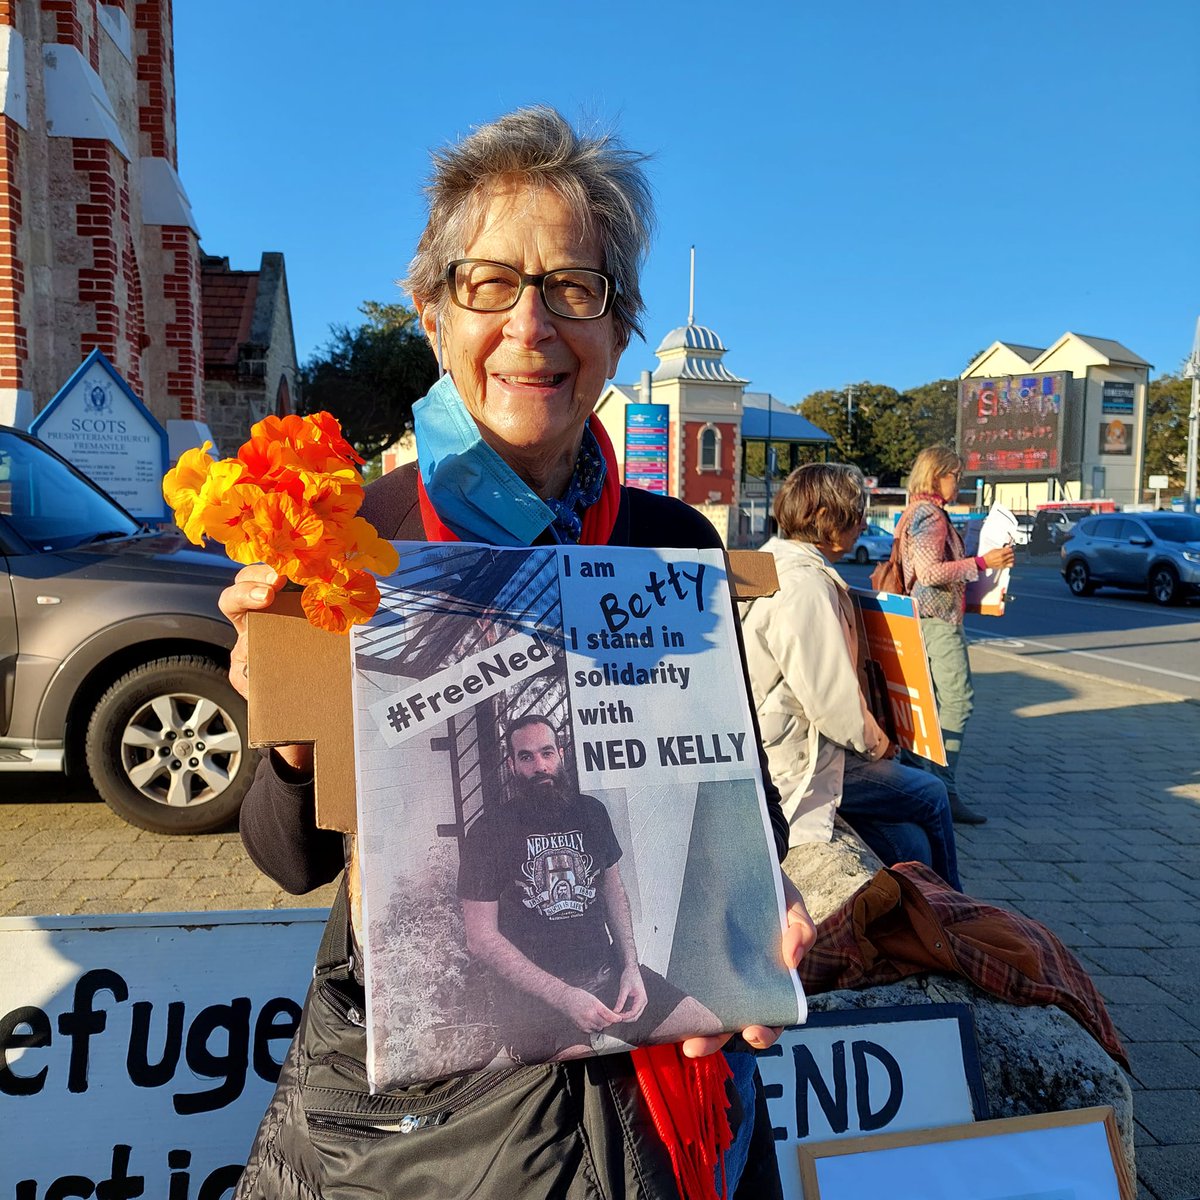 Fremantle Walyalup, 84 yr old Betty is a #Grandmother4Refugee & she stands in solidarity with Iranian refugee @NedKellyEmerald, she is angry that Ned is still being detained. @andrewjgiles & @ClareONeilMP it's time to release Ned.
#10yearstoolong
#FreeNed
#EndIndefiniteDetention